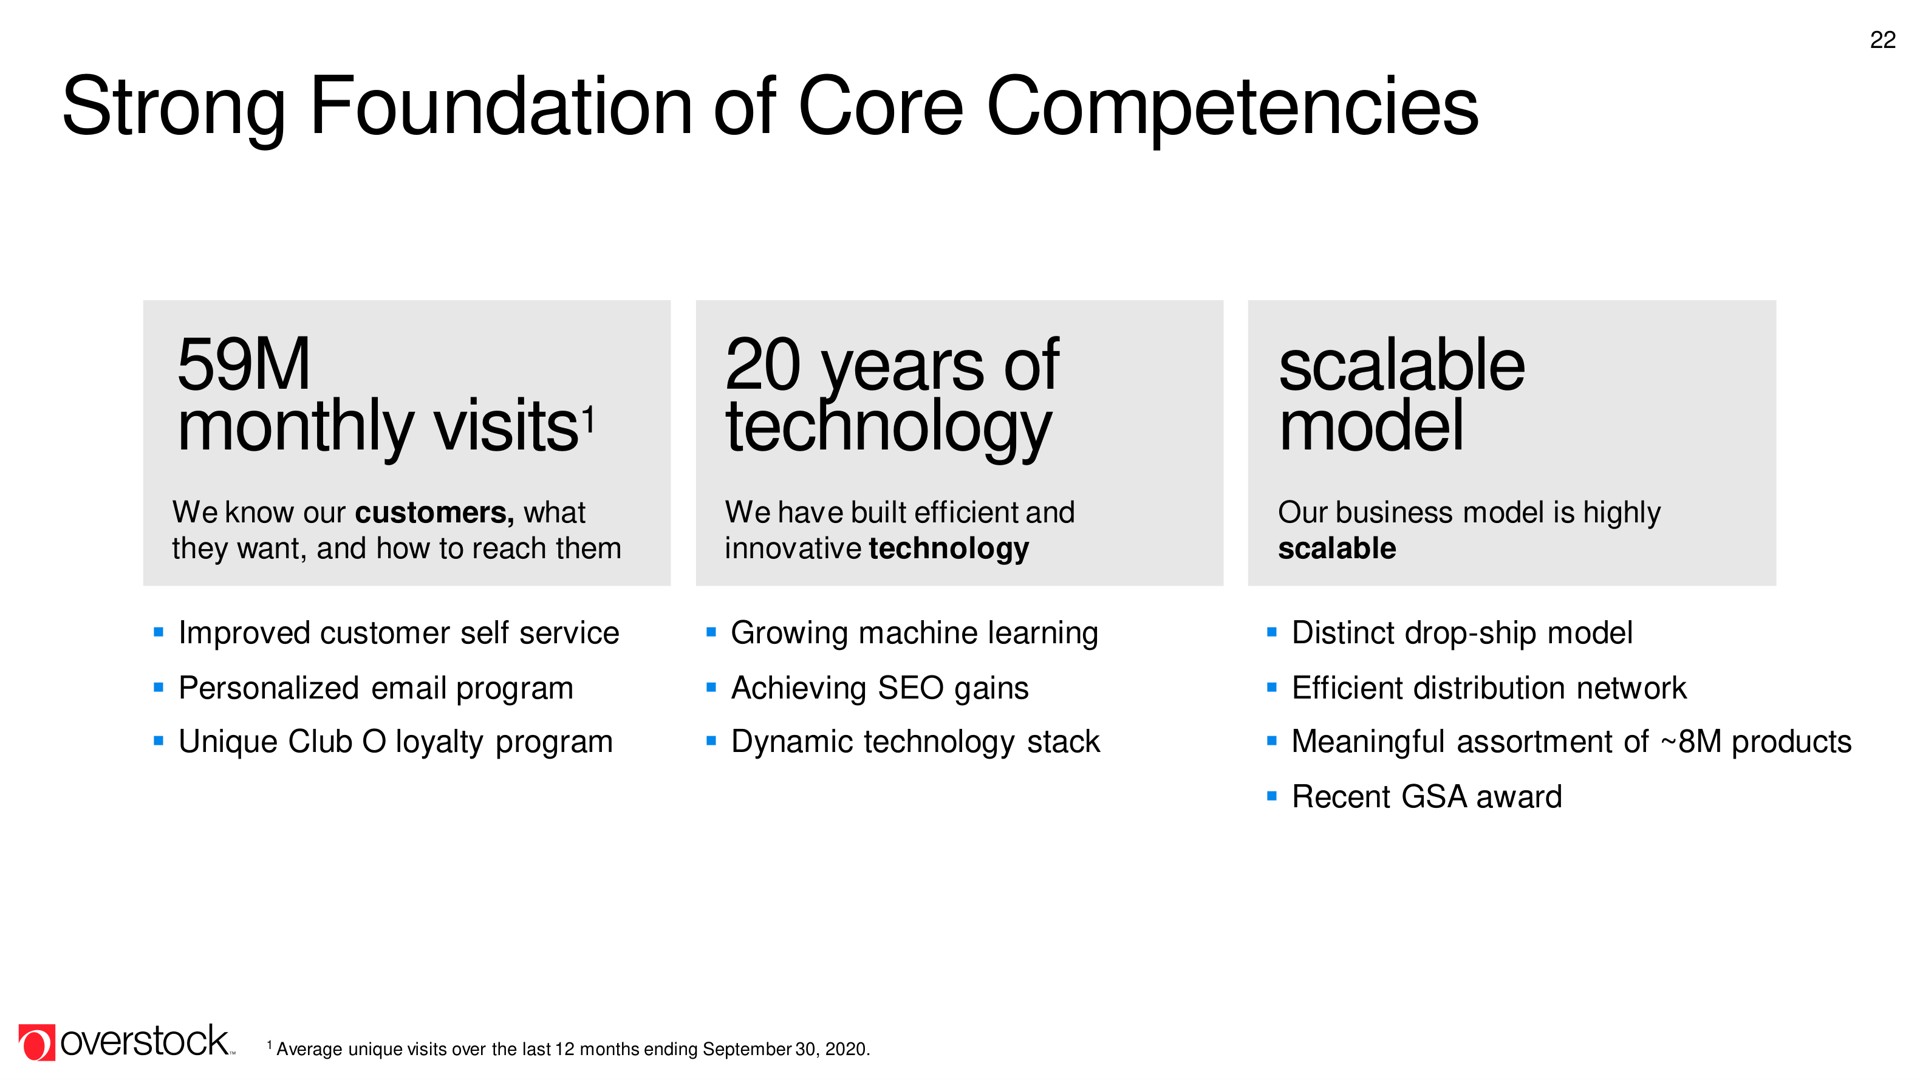 strong foundation of core competencies monthly visits years of technology scalable model visits | Overstock